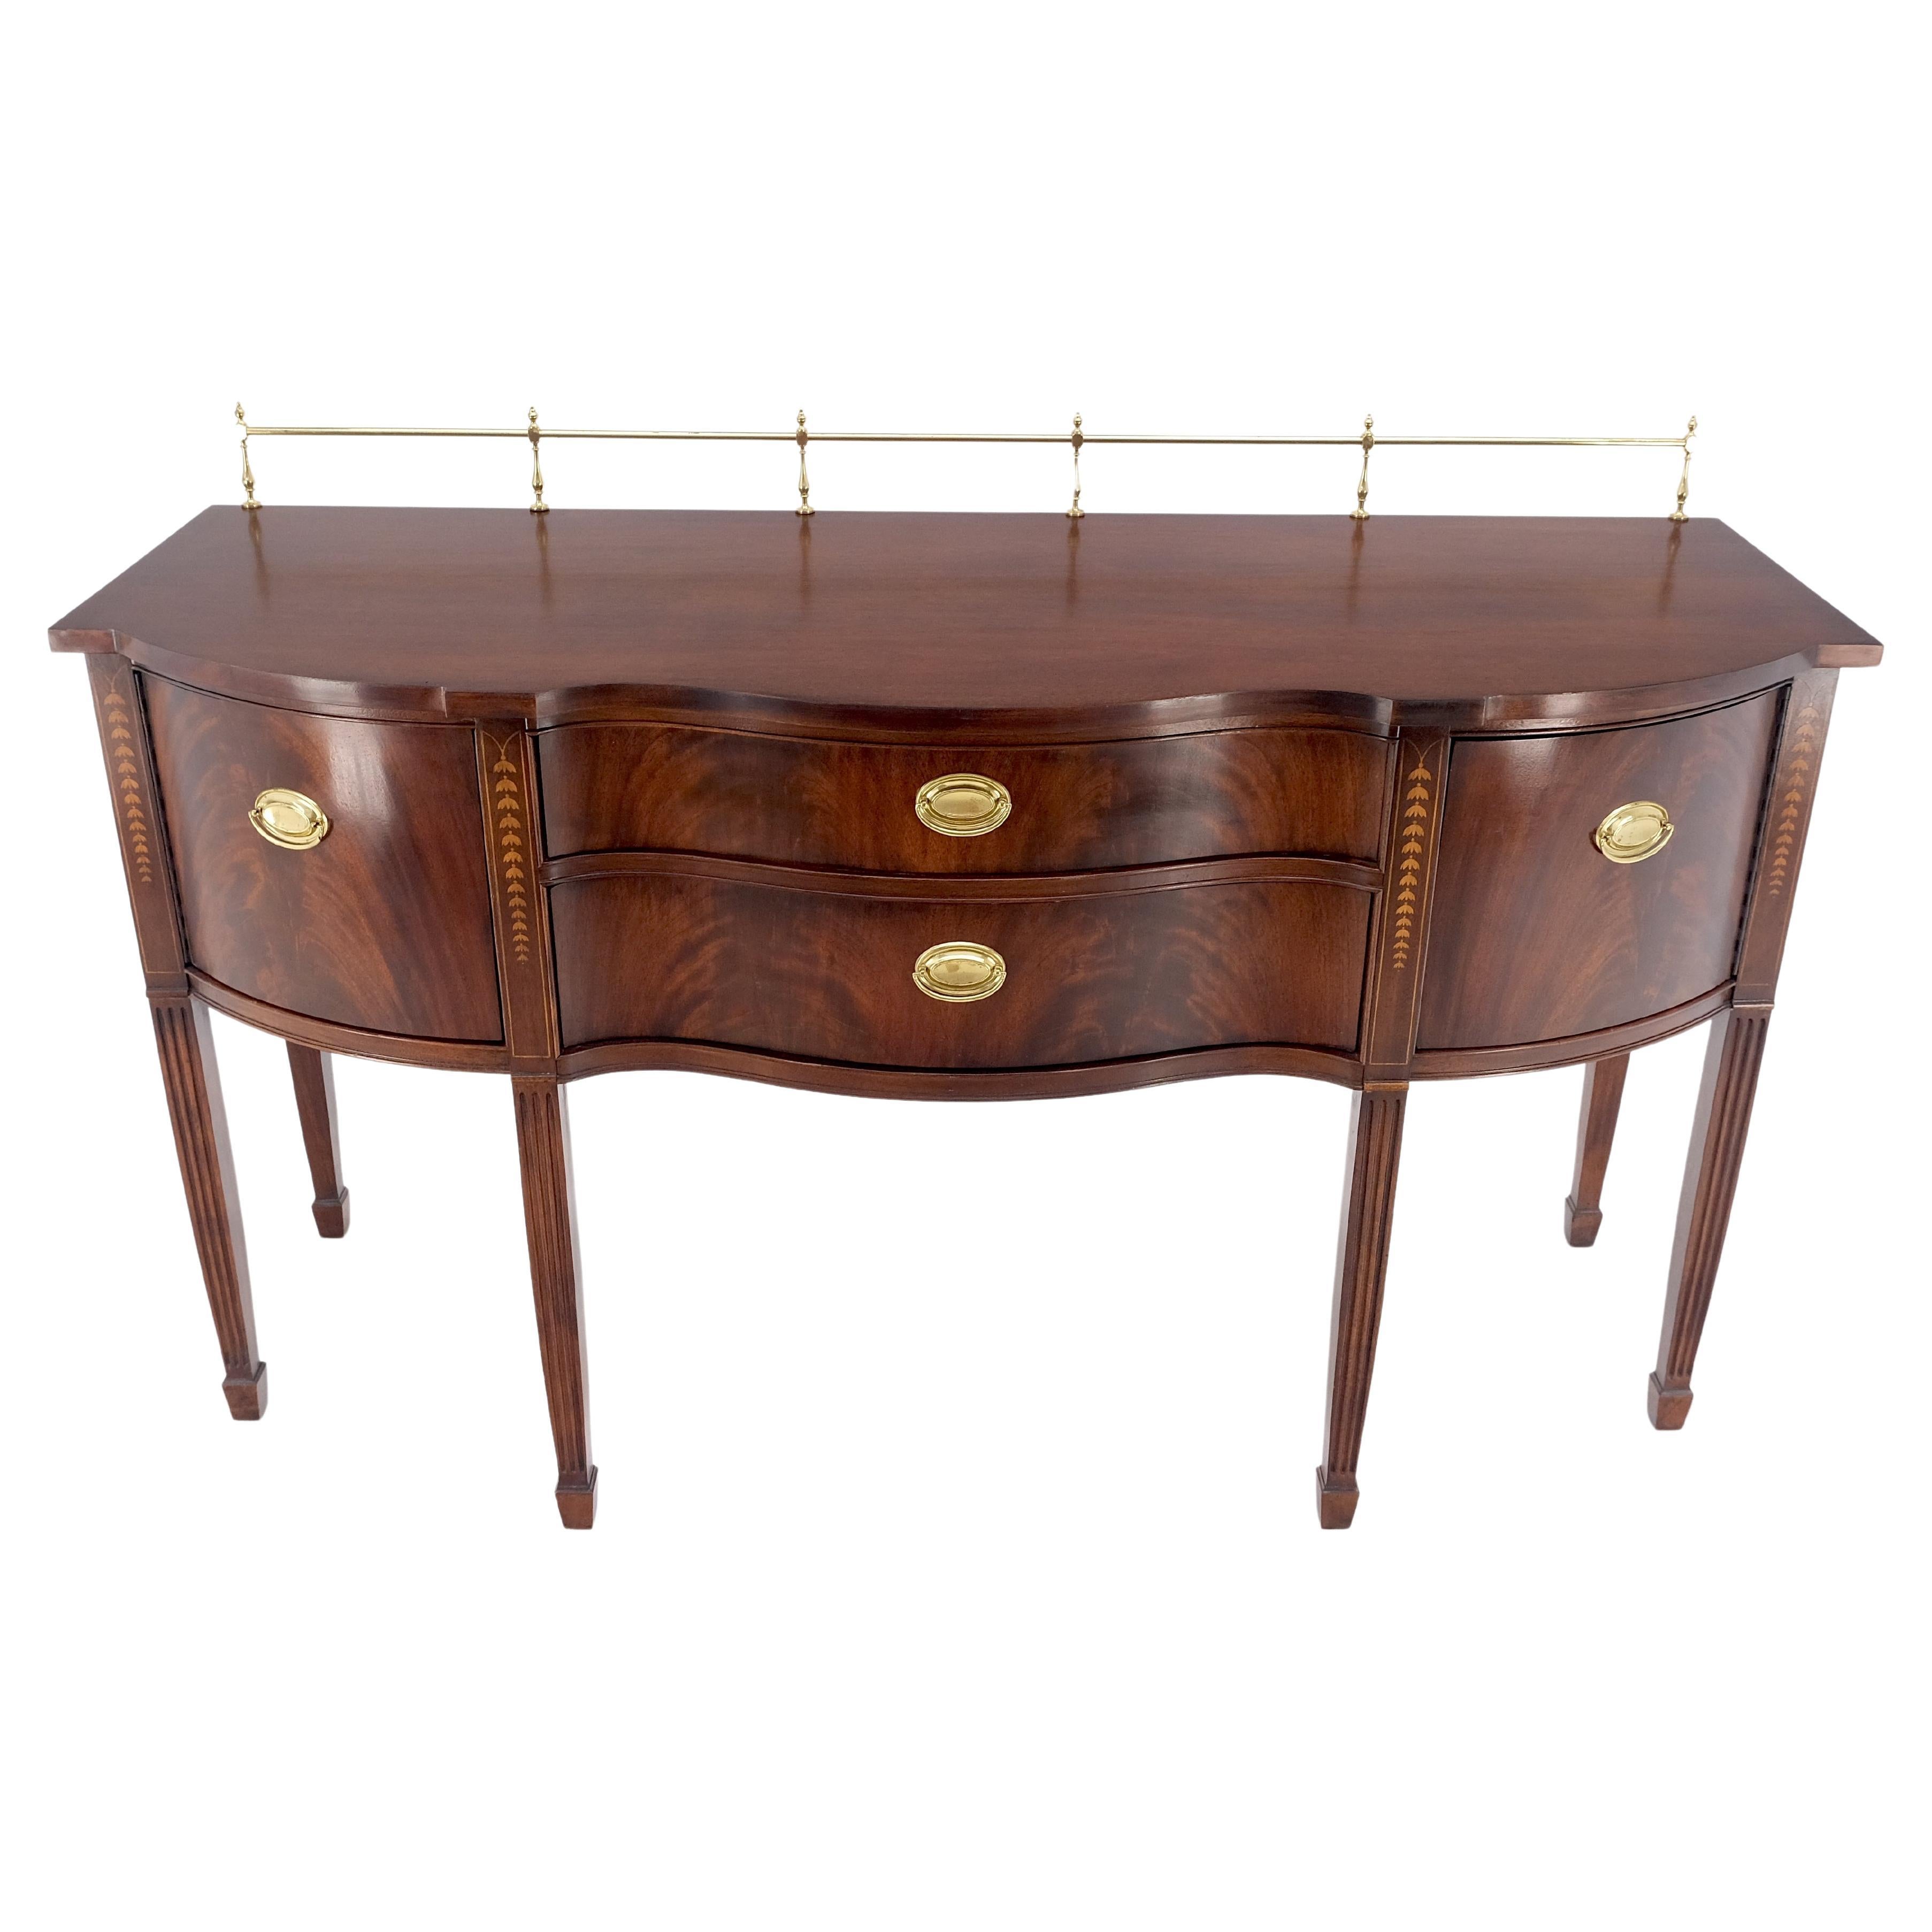 MINT Brass Gallery Crotch Mahogany Serpentine Front Federal Sideboard Thomasvill For Sale